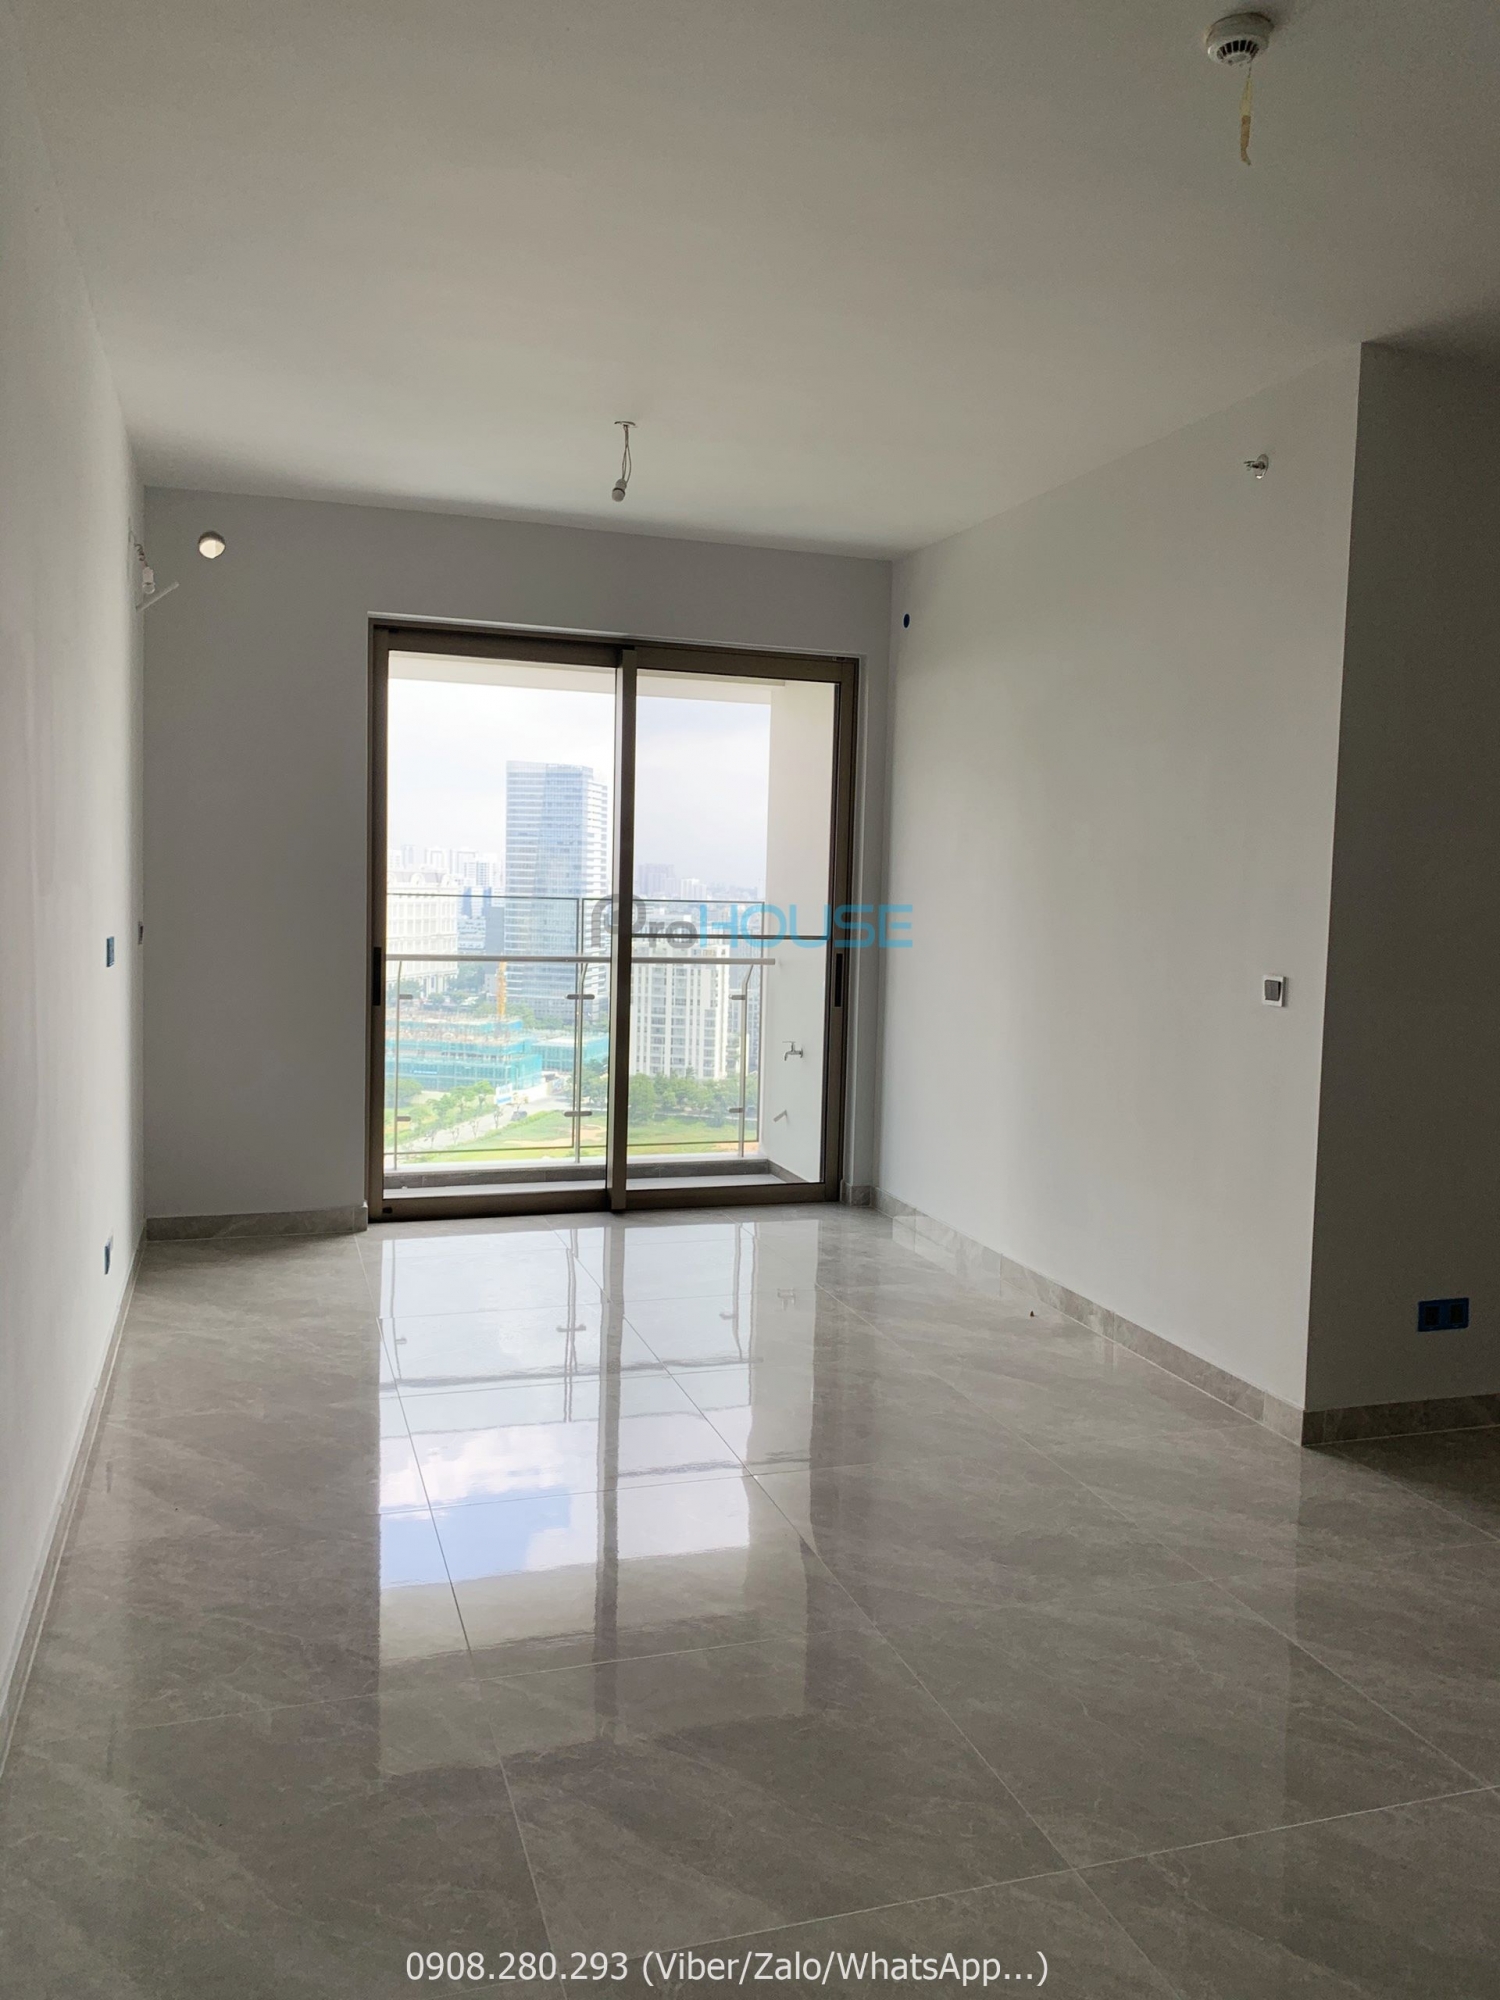 Good price 3 bedroom apartment for sale in Midtown Phu My Hung with foreign quota SPA